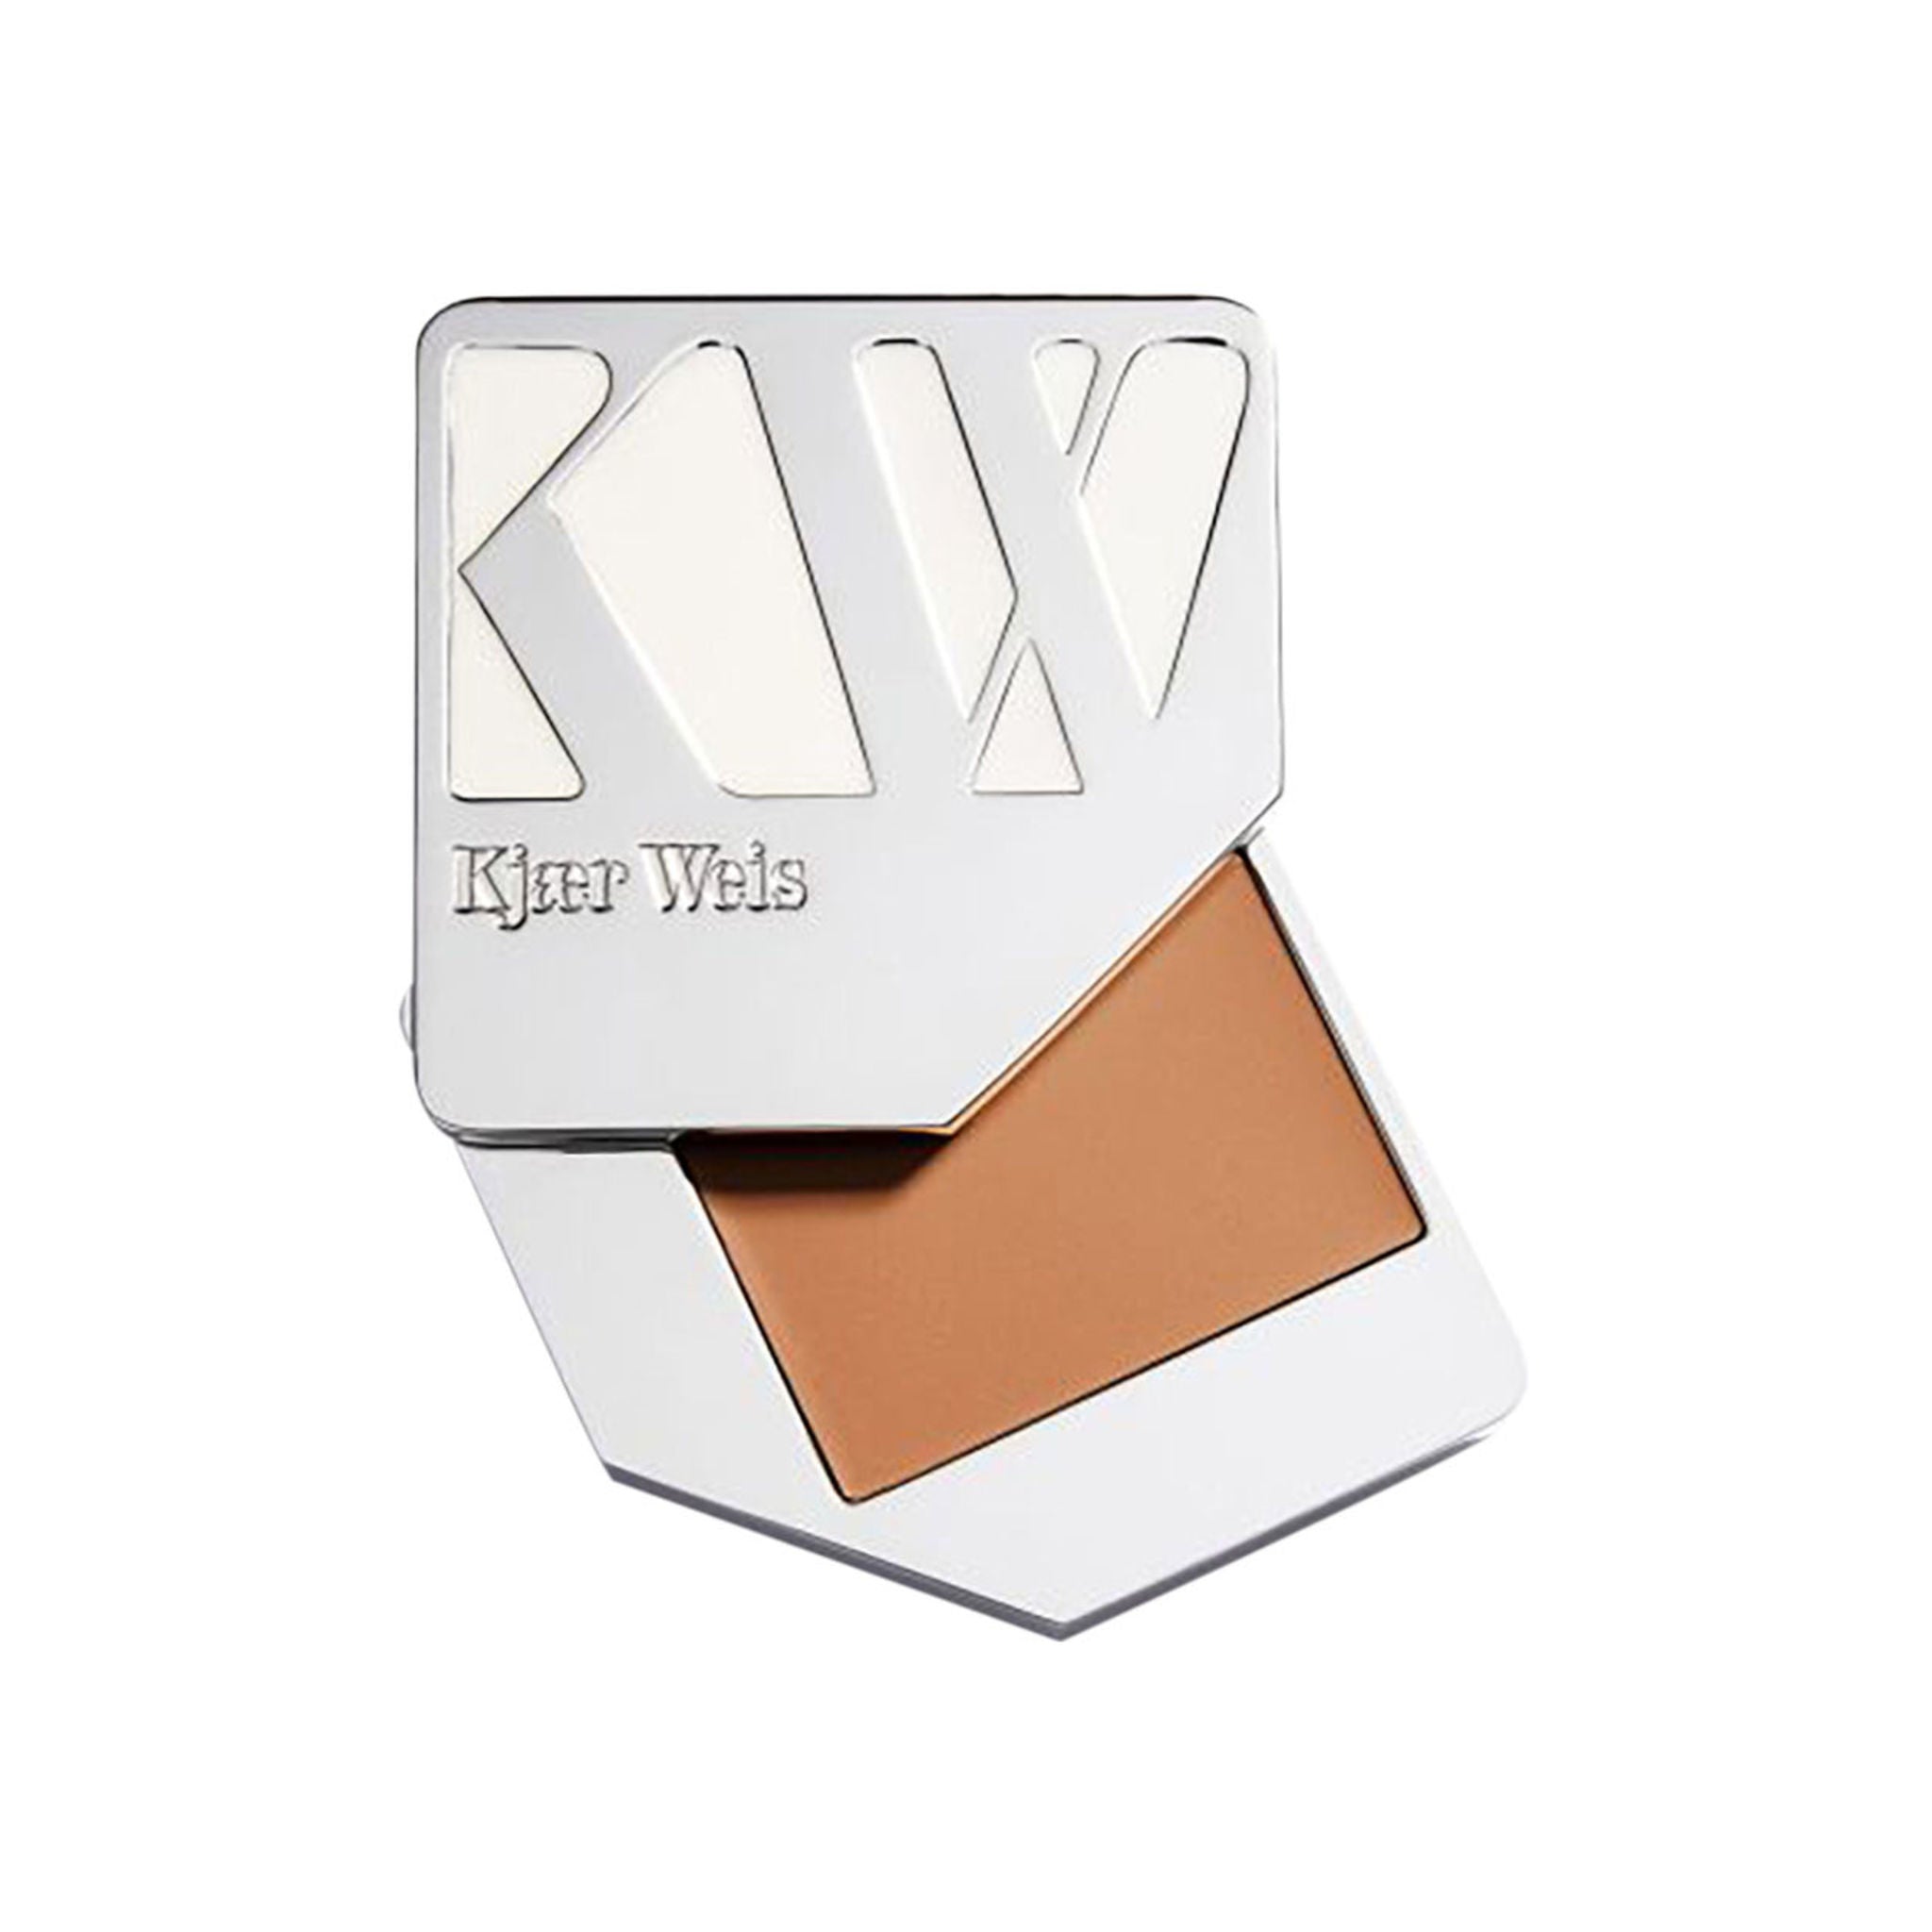 Kjaer Weis Cream Foundation Color/Shade variant: Dainty main image. This product is for deep complexions